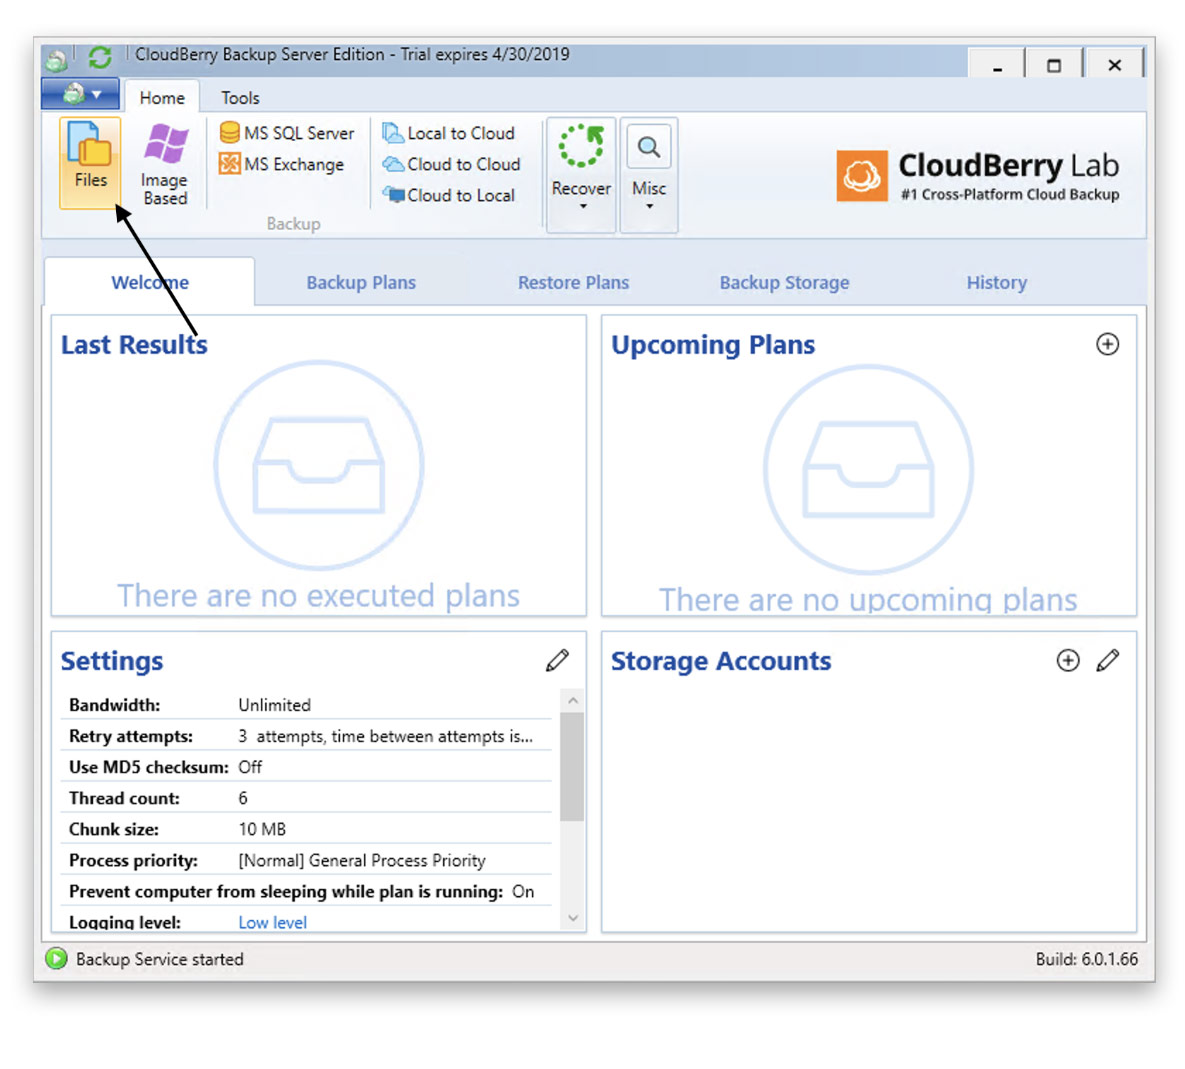 cloudberry backup losts folder issues